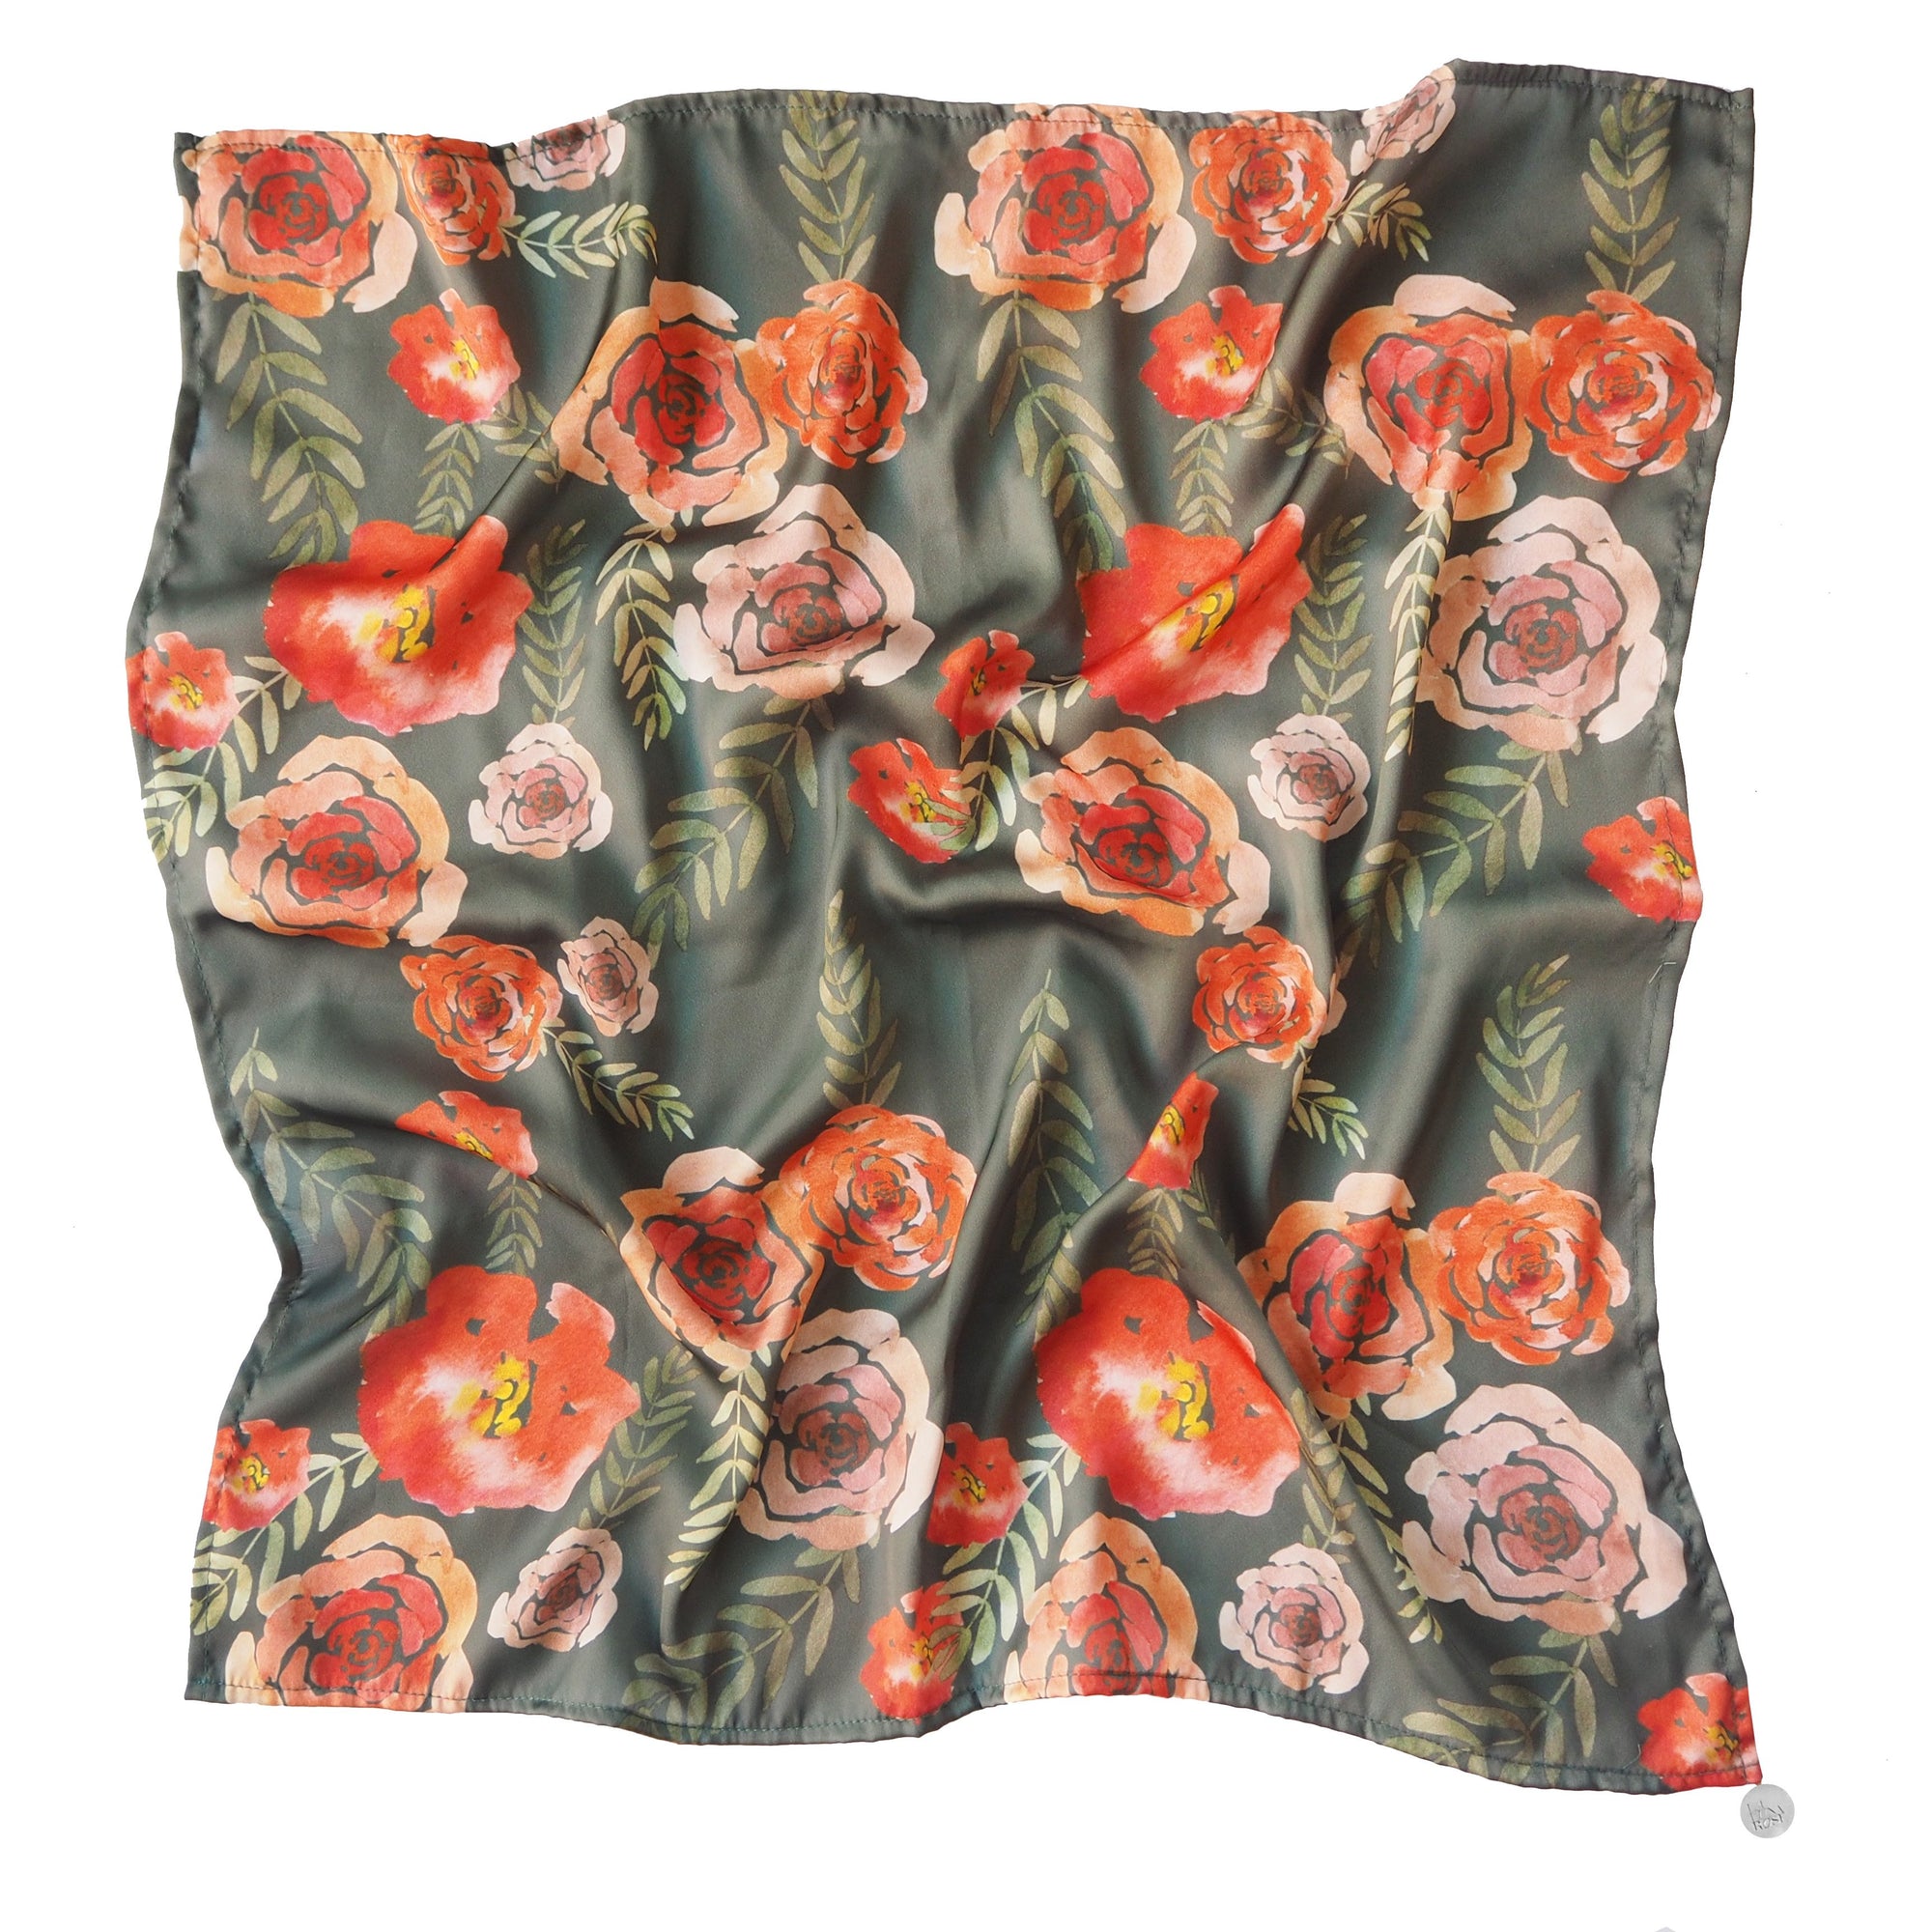 Luna and Rose flores printed Neck Scarf of Roses